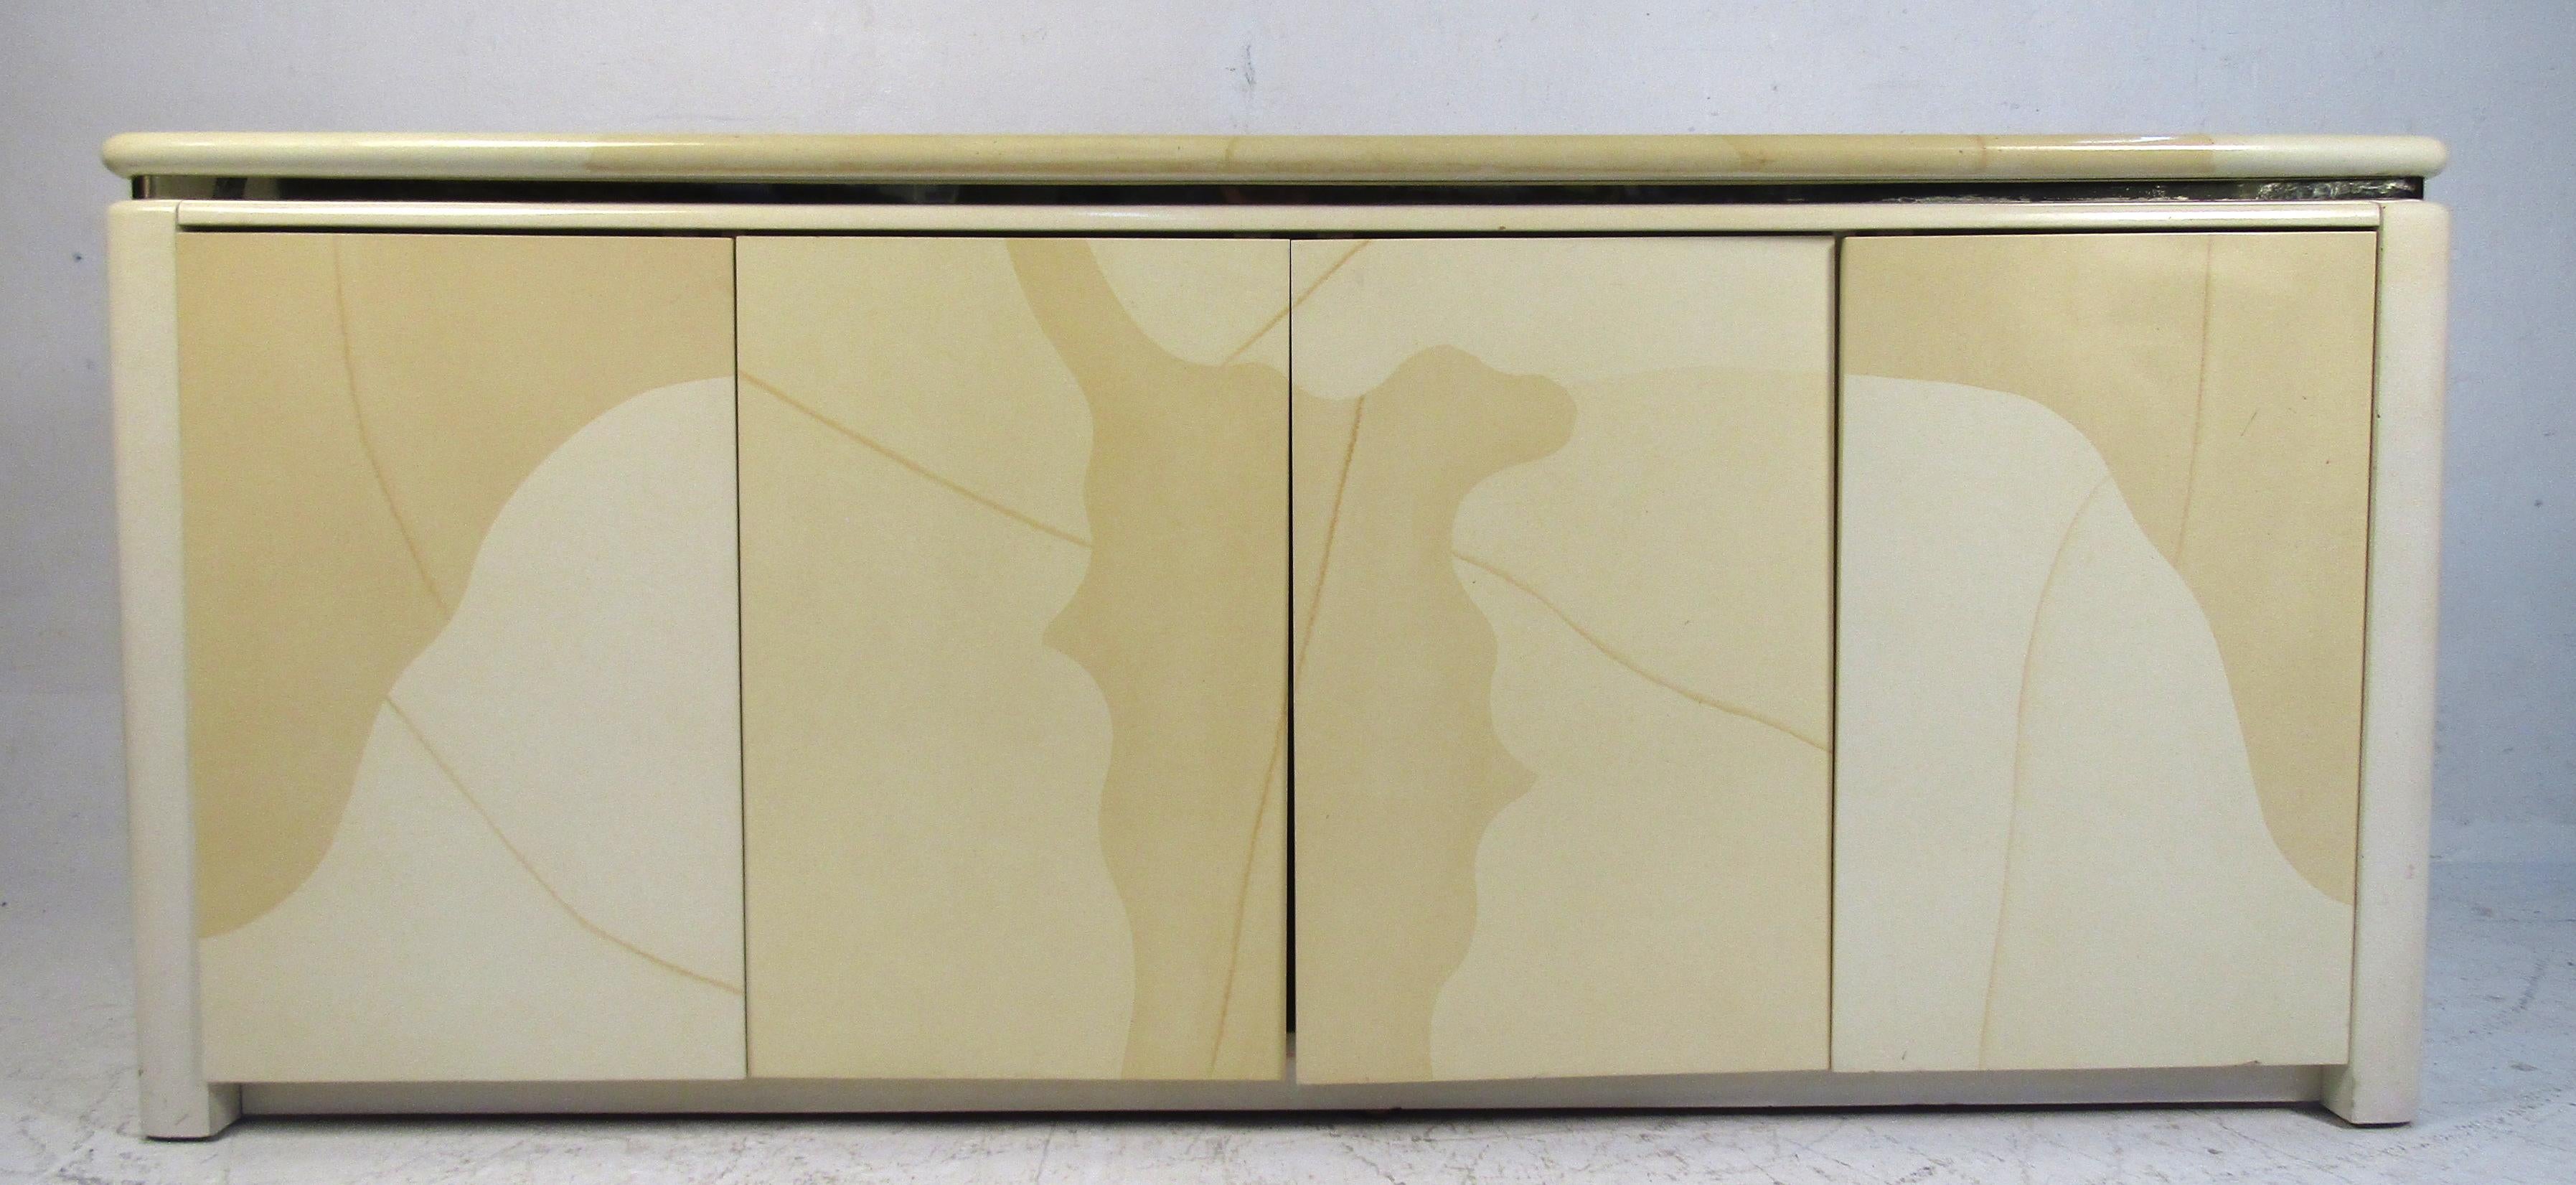 Long sideboard in goatskin material with push doors. Karl Springer modern style.
(Please confirm item location - NY or NJ - with dealer).
 